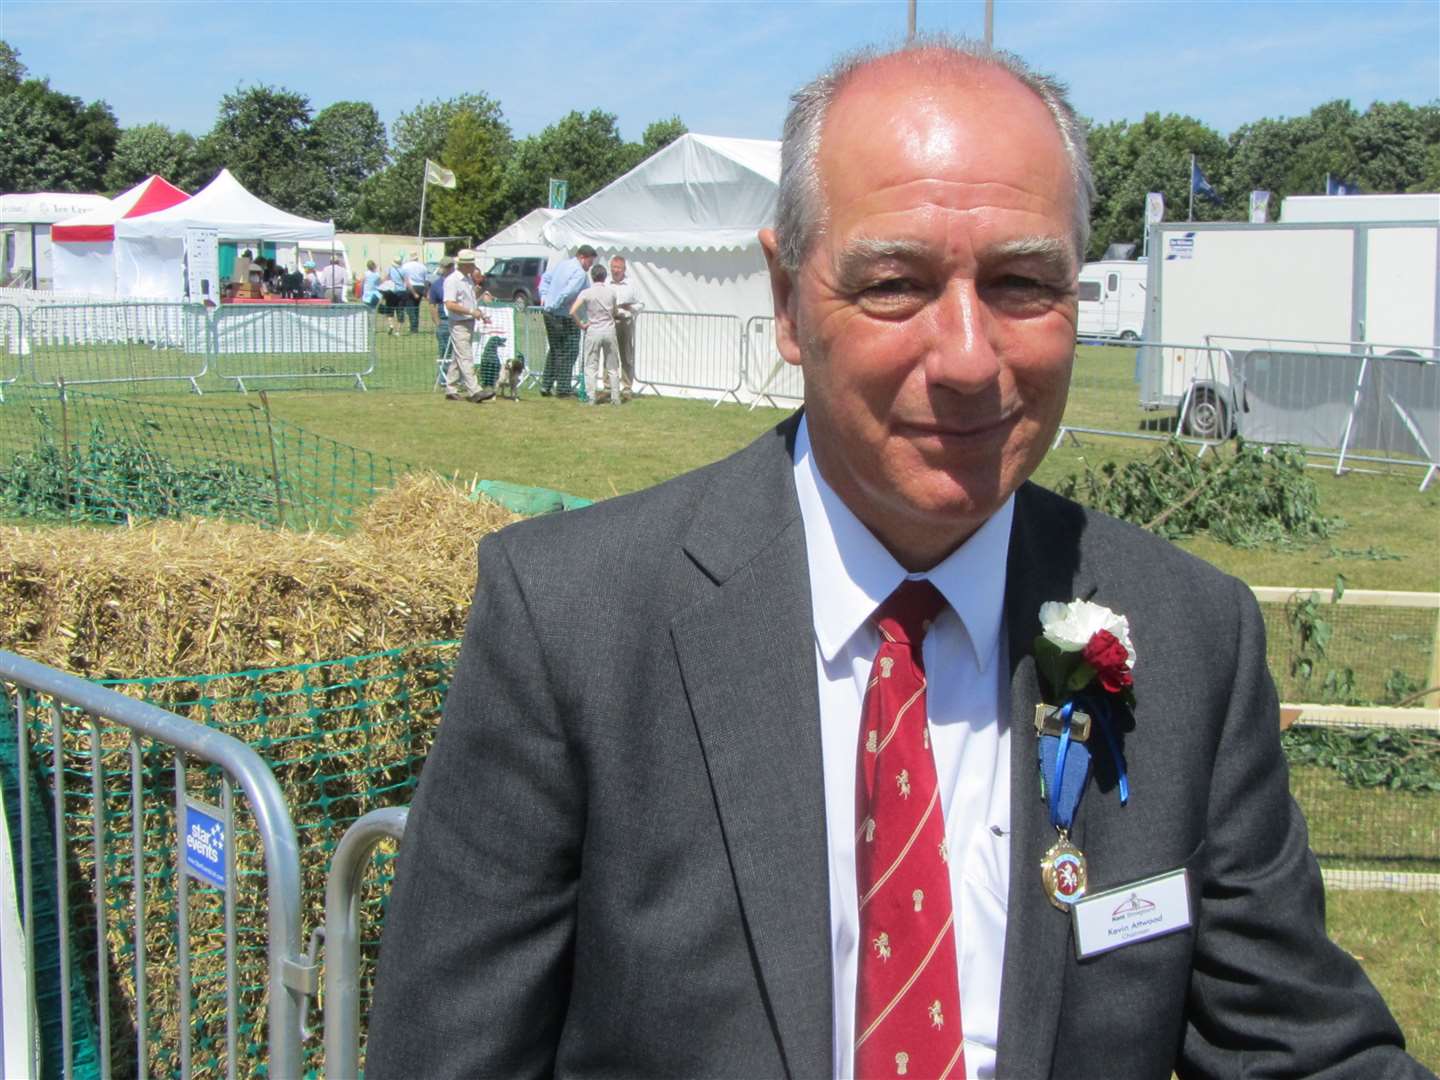 Farmer Kevin Attwood, former chairman of Kent County Agricultural Society